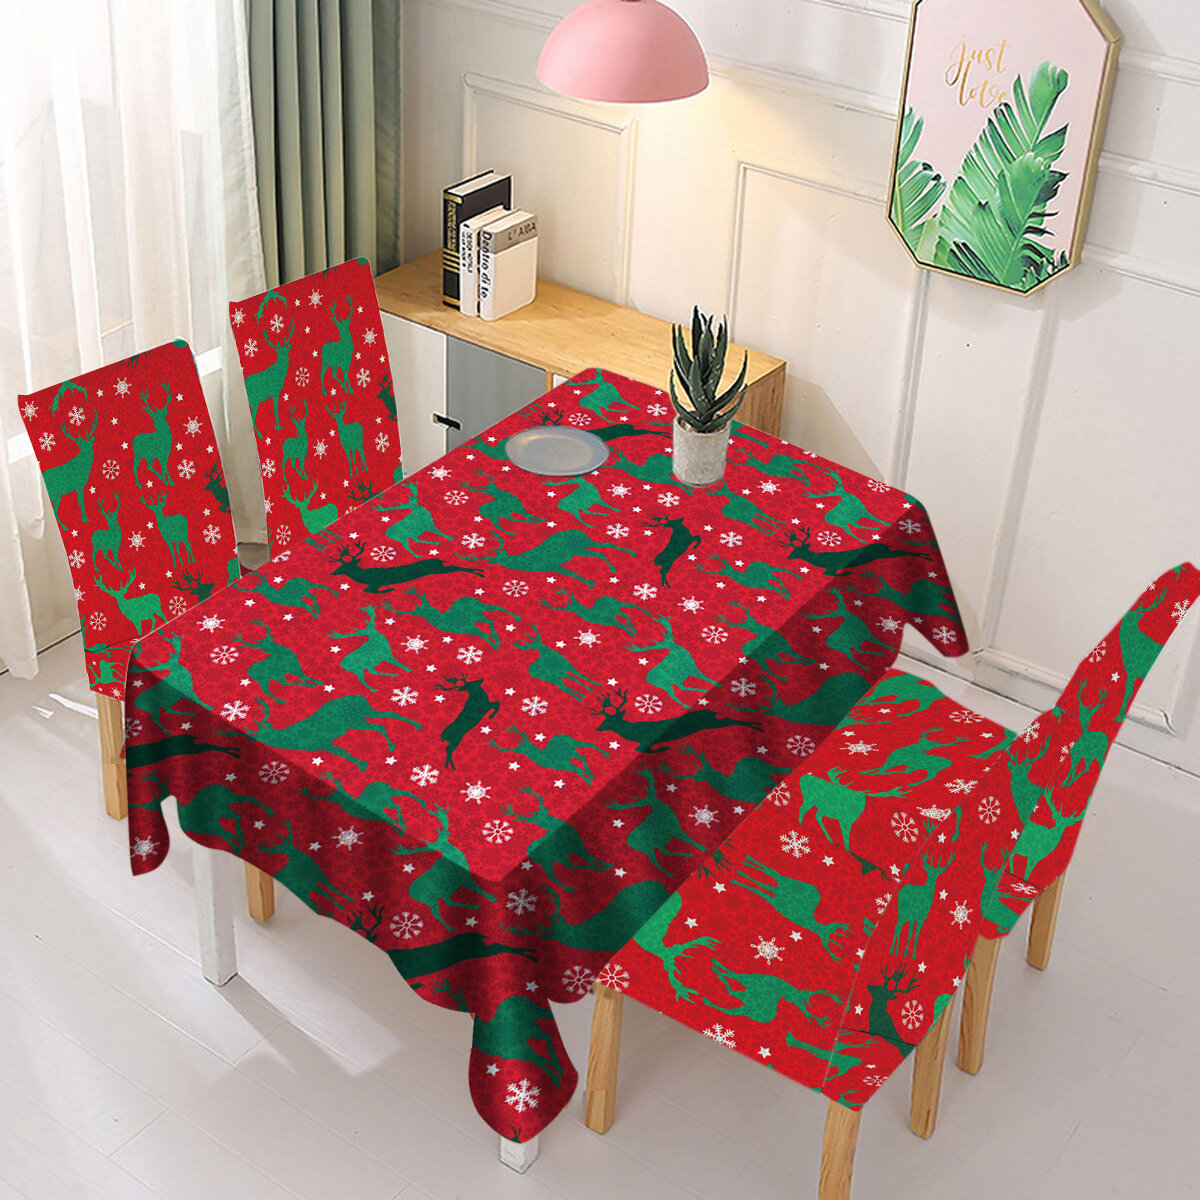 2020 Christmas Polyester Table Cloth Chair Cover Rectangular Tablecloth Xmas Dinning Dustproof Table Cover New Year Gift